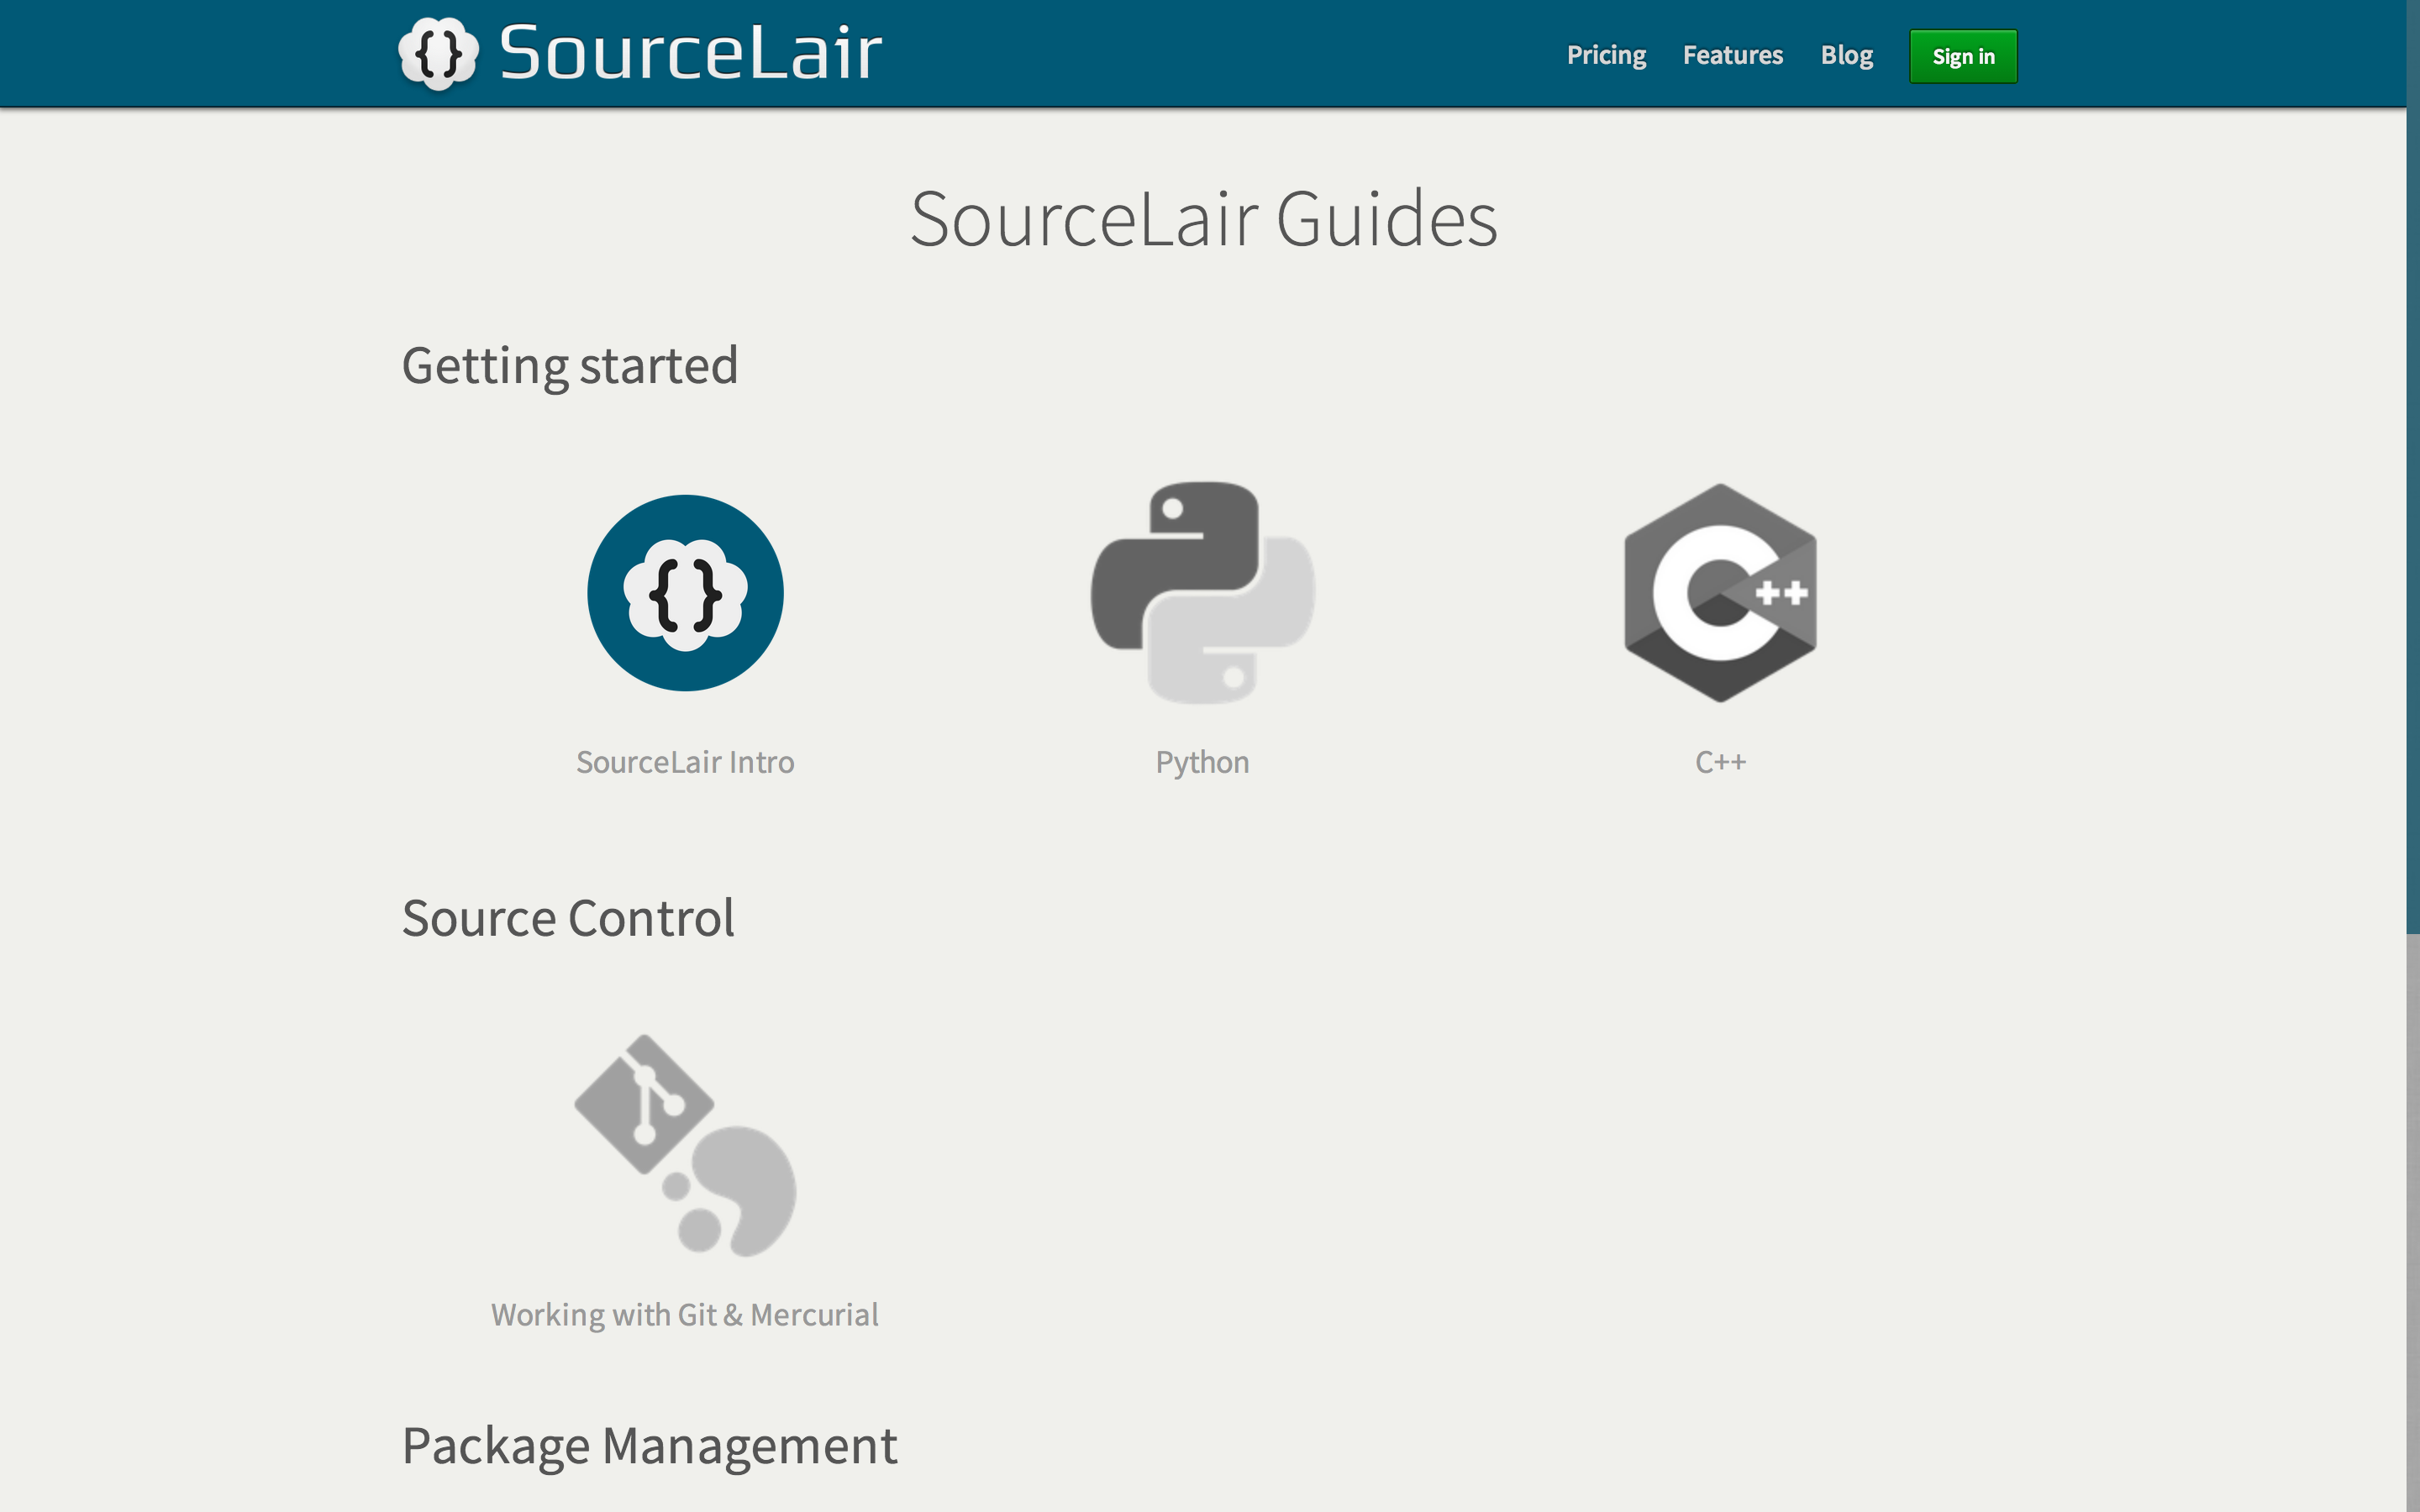 SourceLair Guides